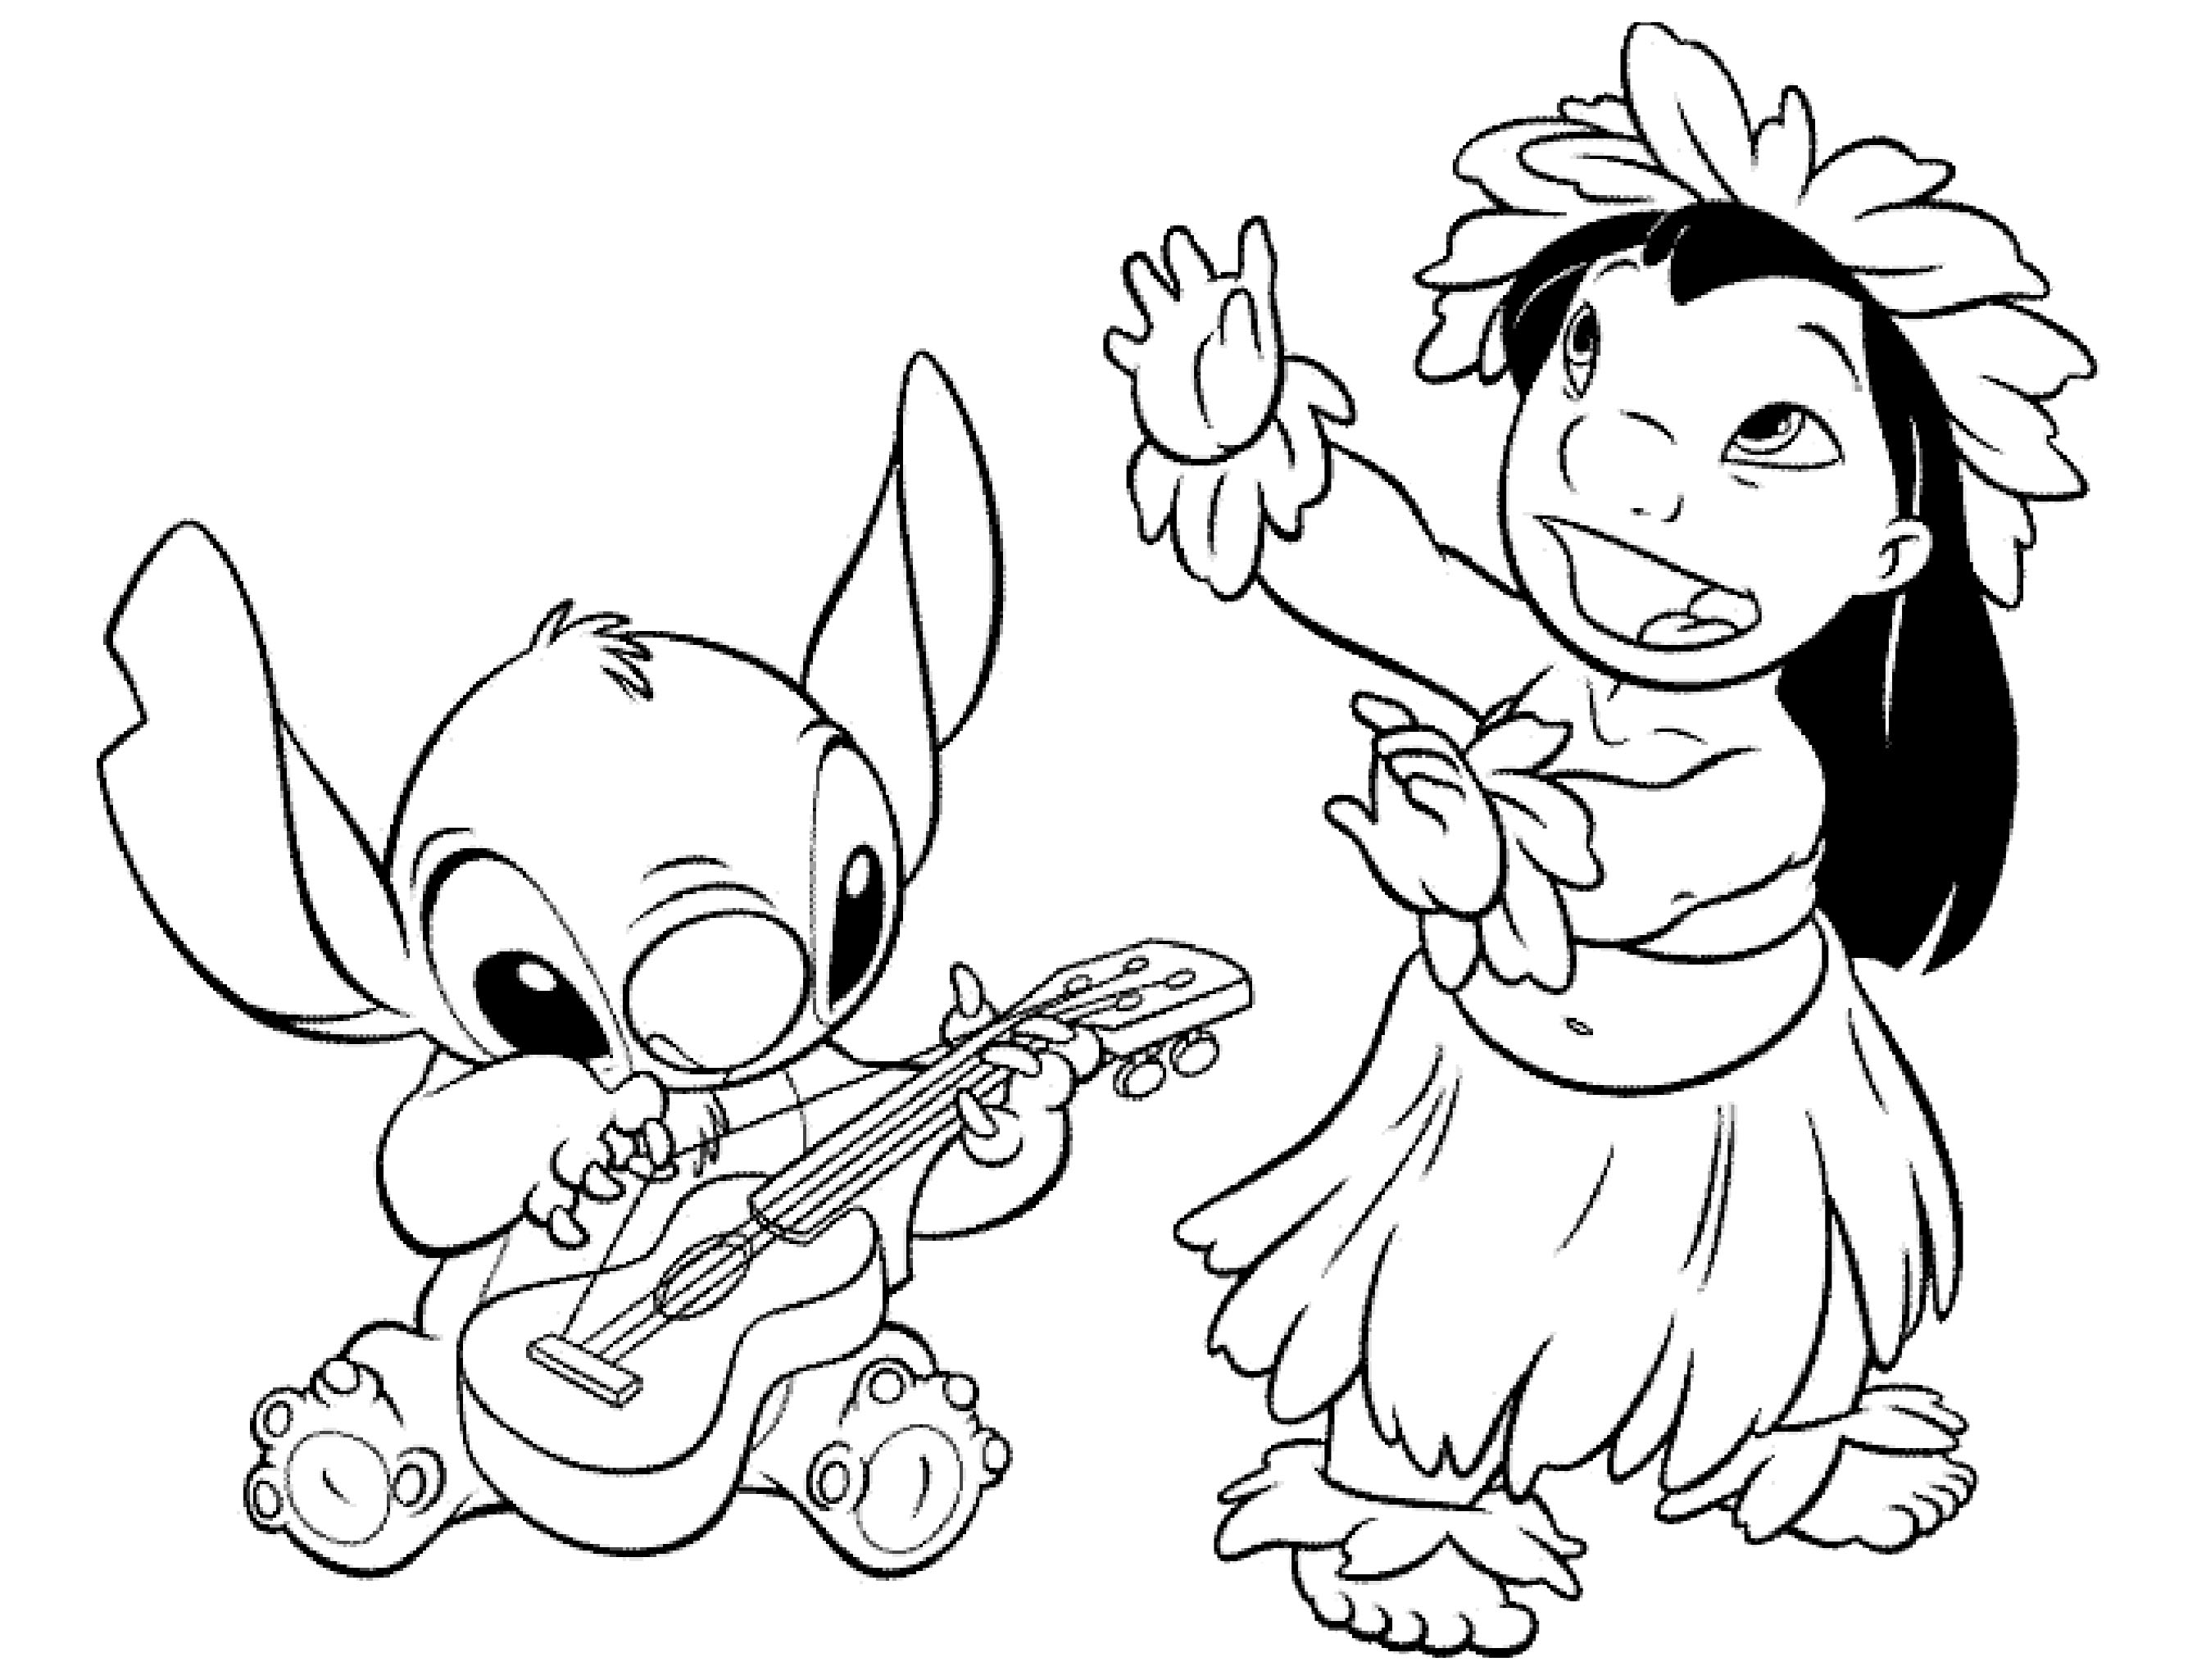 Lilo & Stitch Coloring Pages Updated 20. 